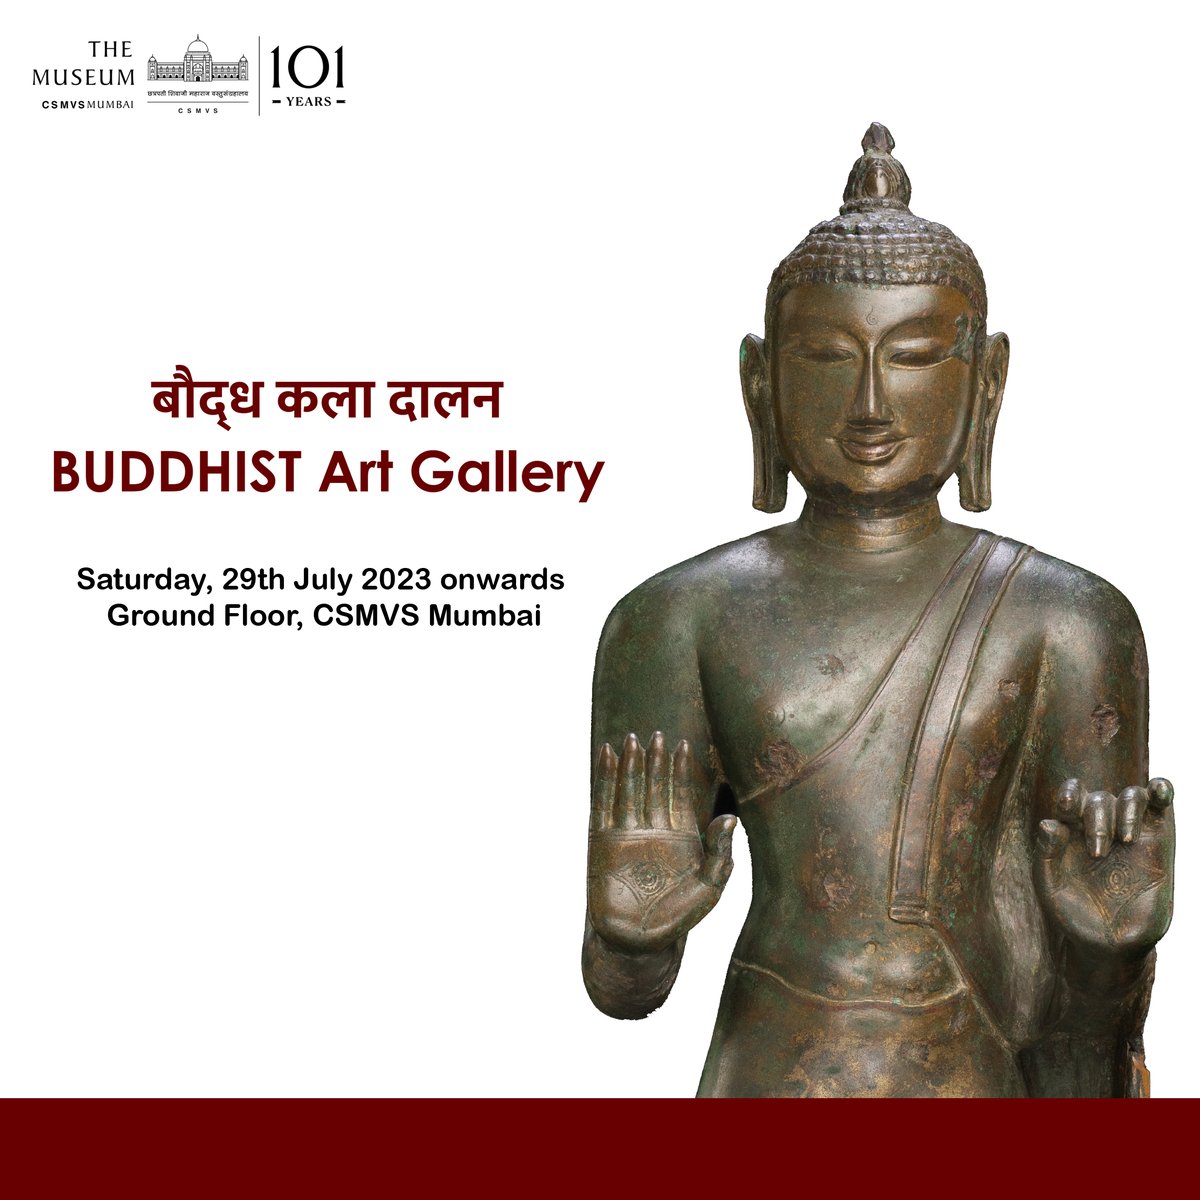 Buddhism begins in India in 500 BCE, which is known as a time of intellectual and spiritual progress across the world. This Gallery presents the development of Buddhism through icons and images. A true story of a living legend. Our new gallery is now open to the public.